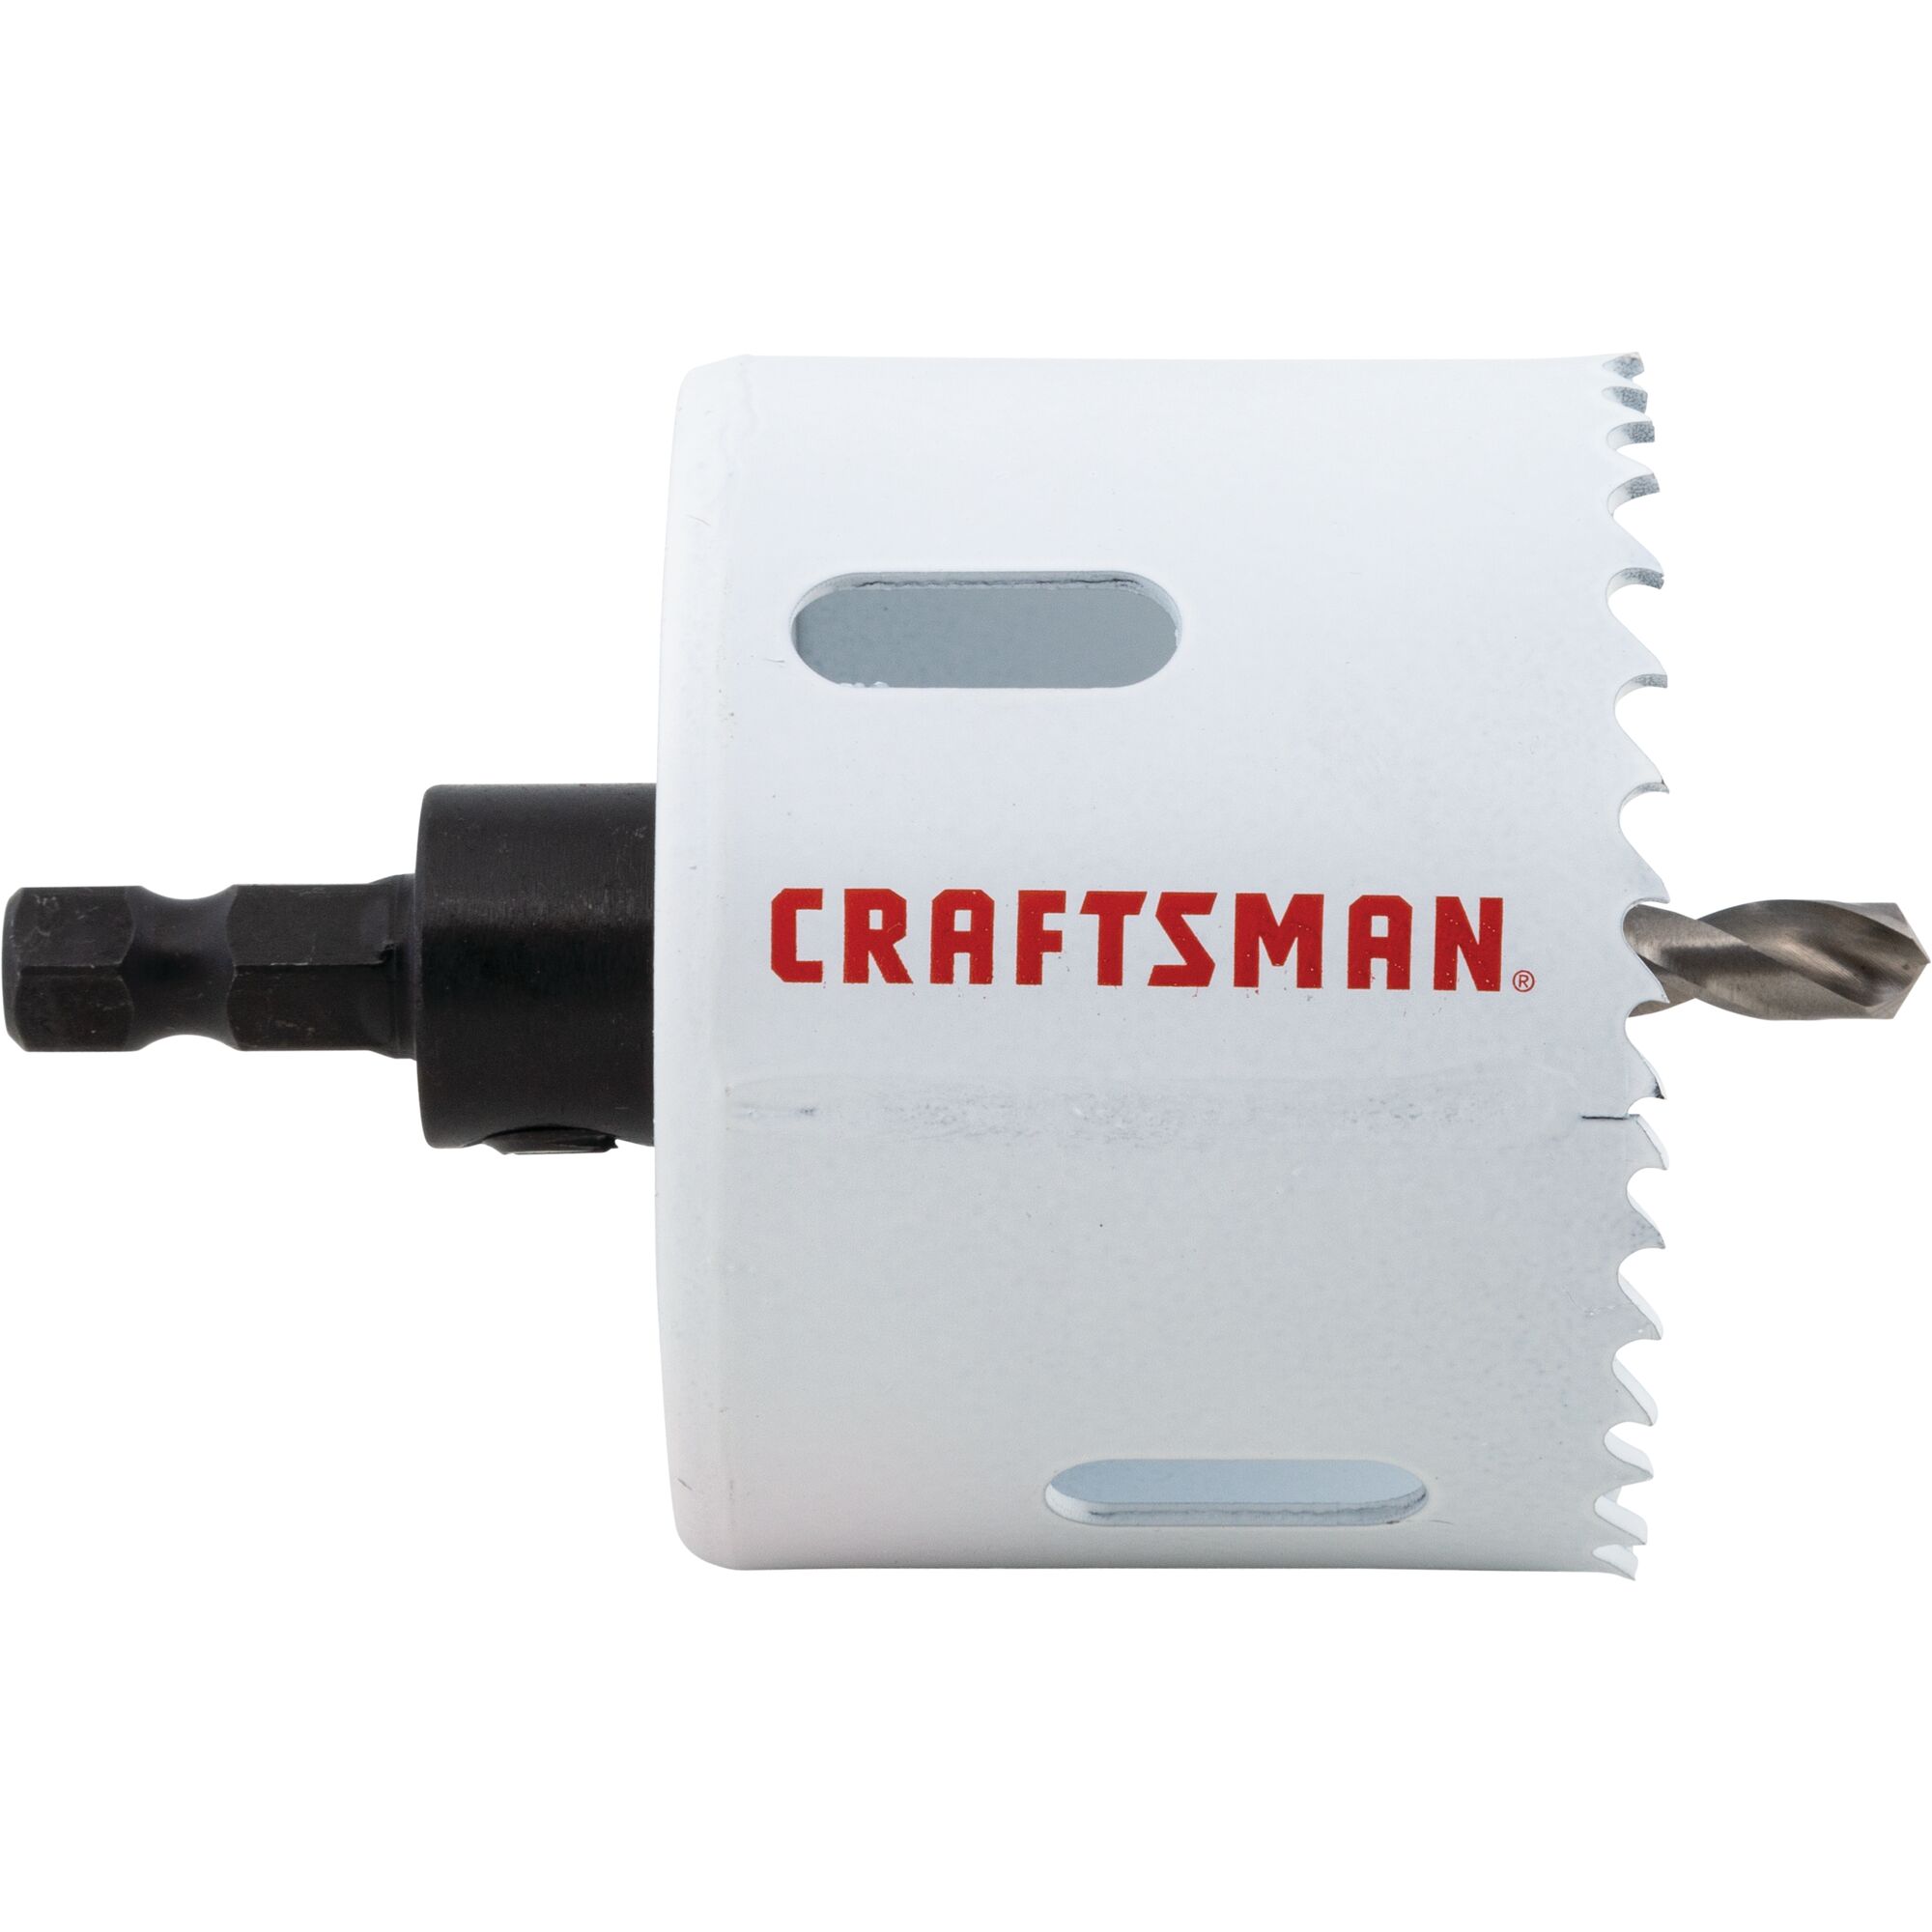 View of CRAFTSMAN Hole Saws on white background